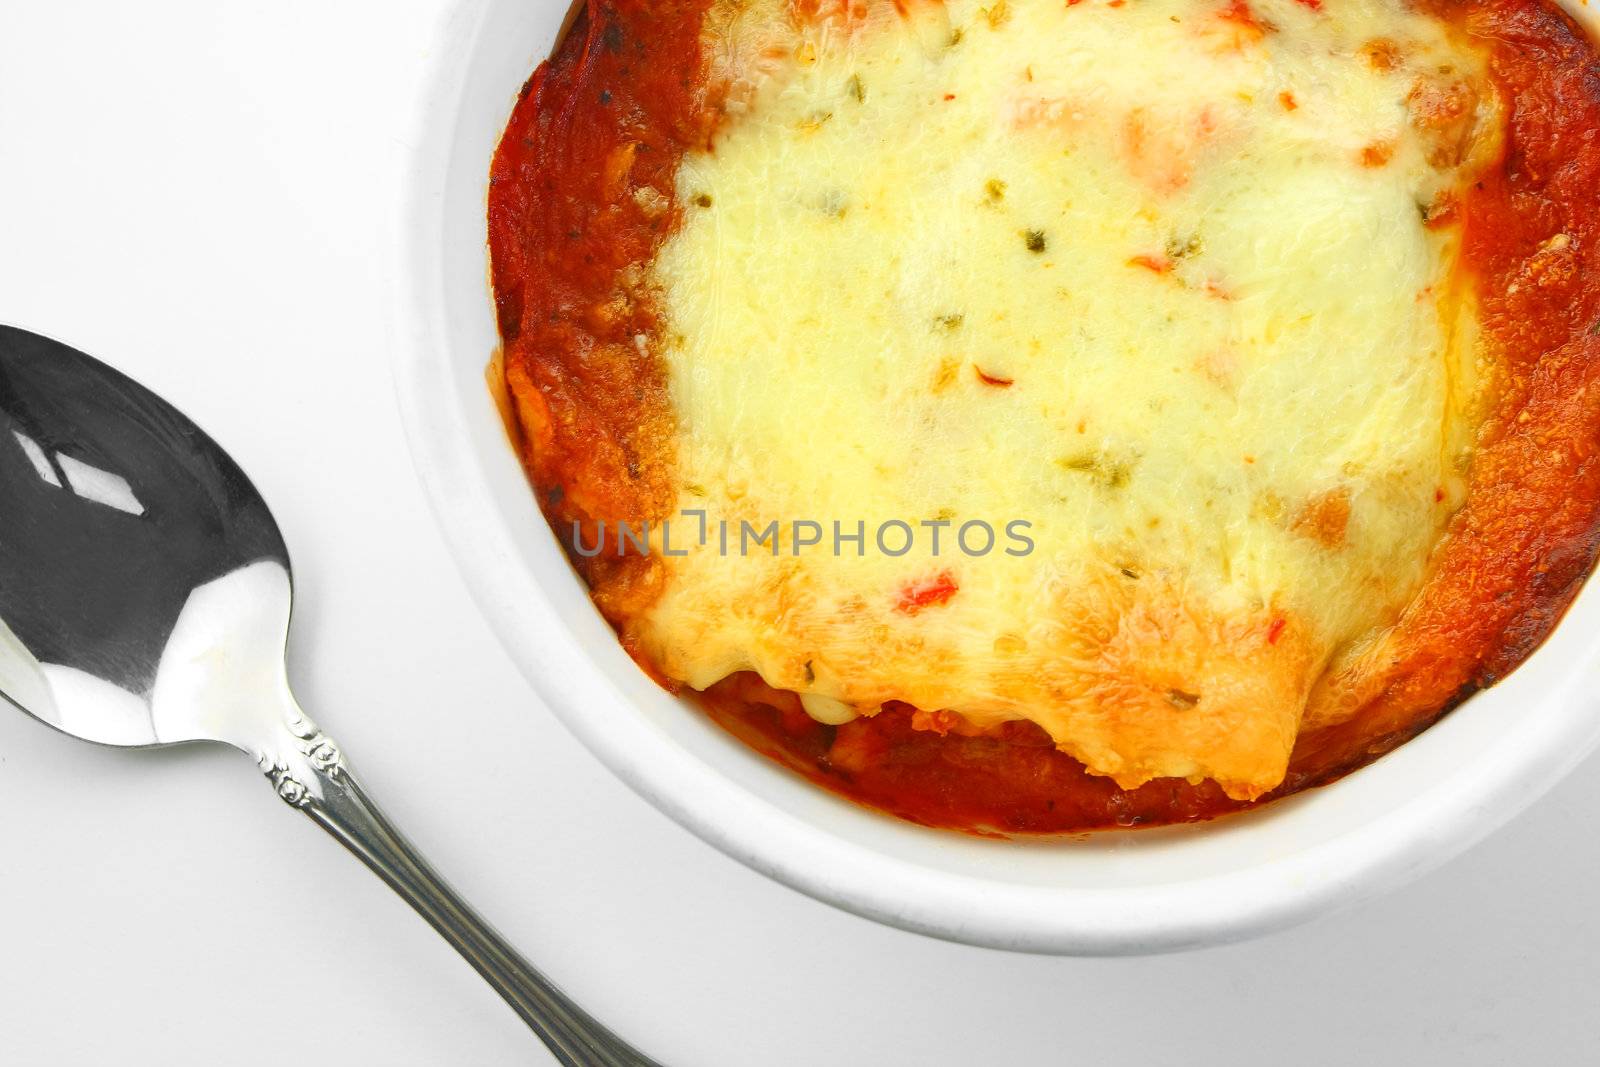 Baked Lasagna with Spoon by Geoarts